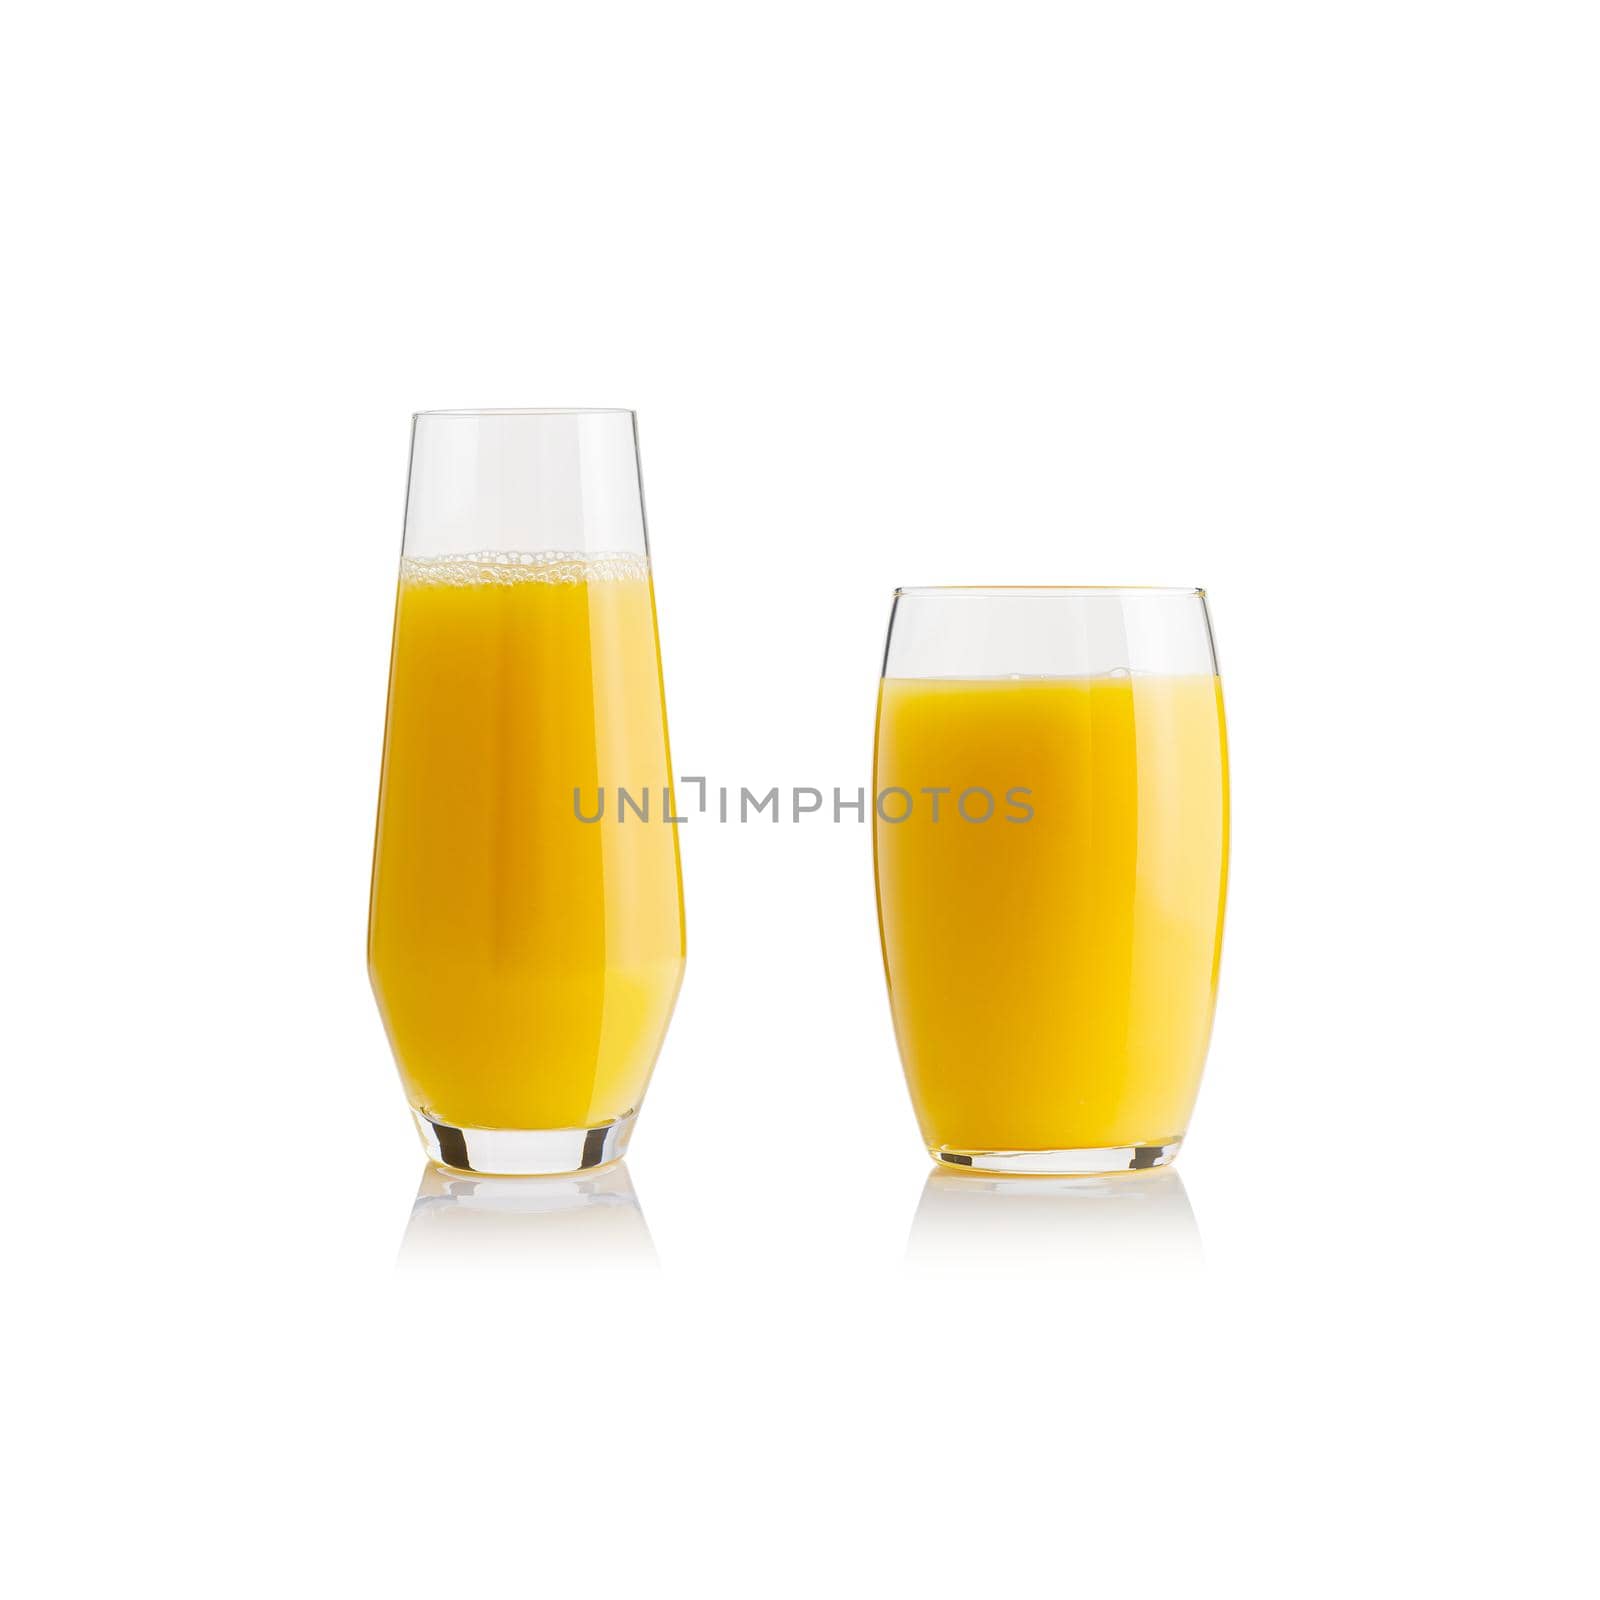 Collection of orange juice in different glasses . eparate clipping paths for each glass. Set of glasses with tropical orange juice